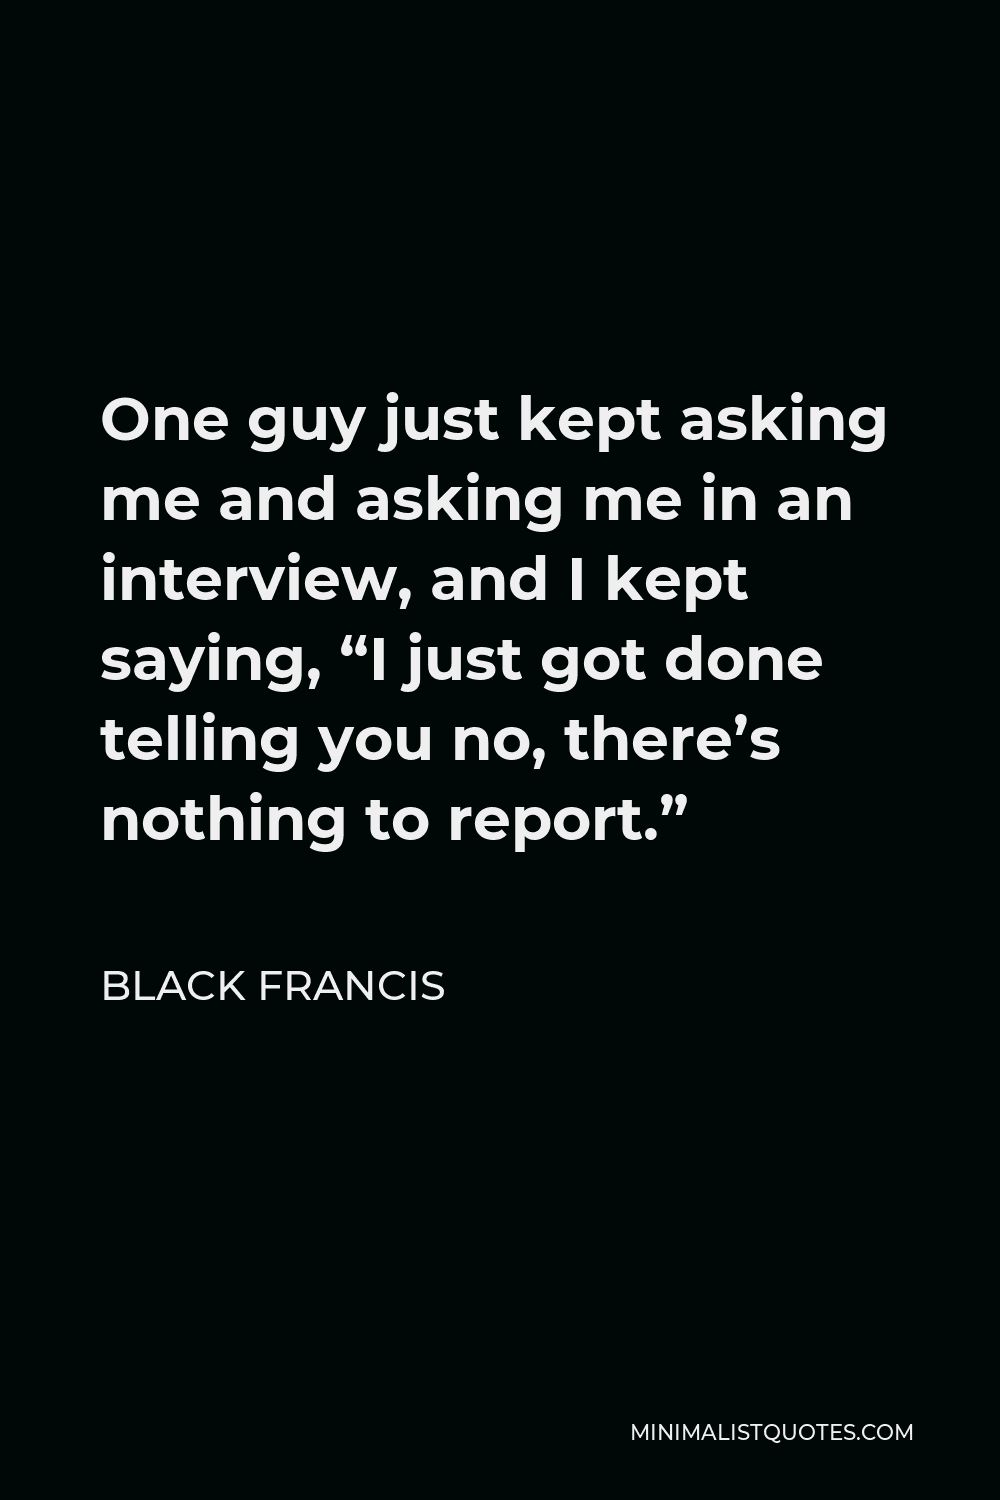 Black Francis Quote - One guy just kept asking me and asking me in an interview, and I kept saying, “I just got done telling you no, there’s nothing to report.”